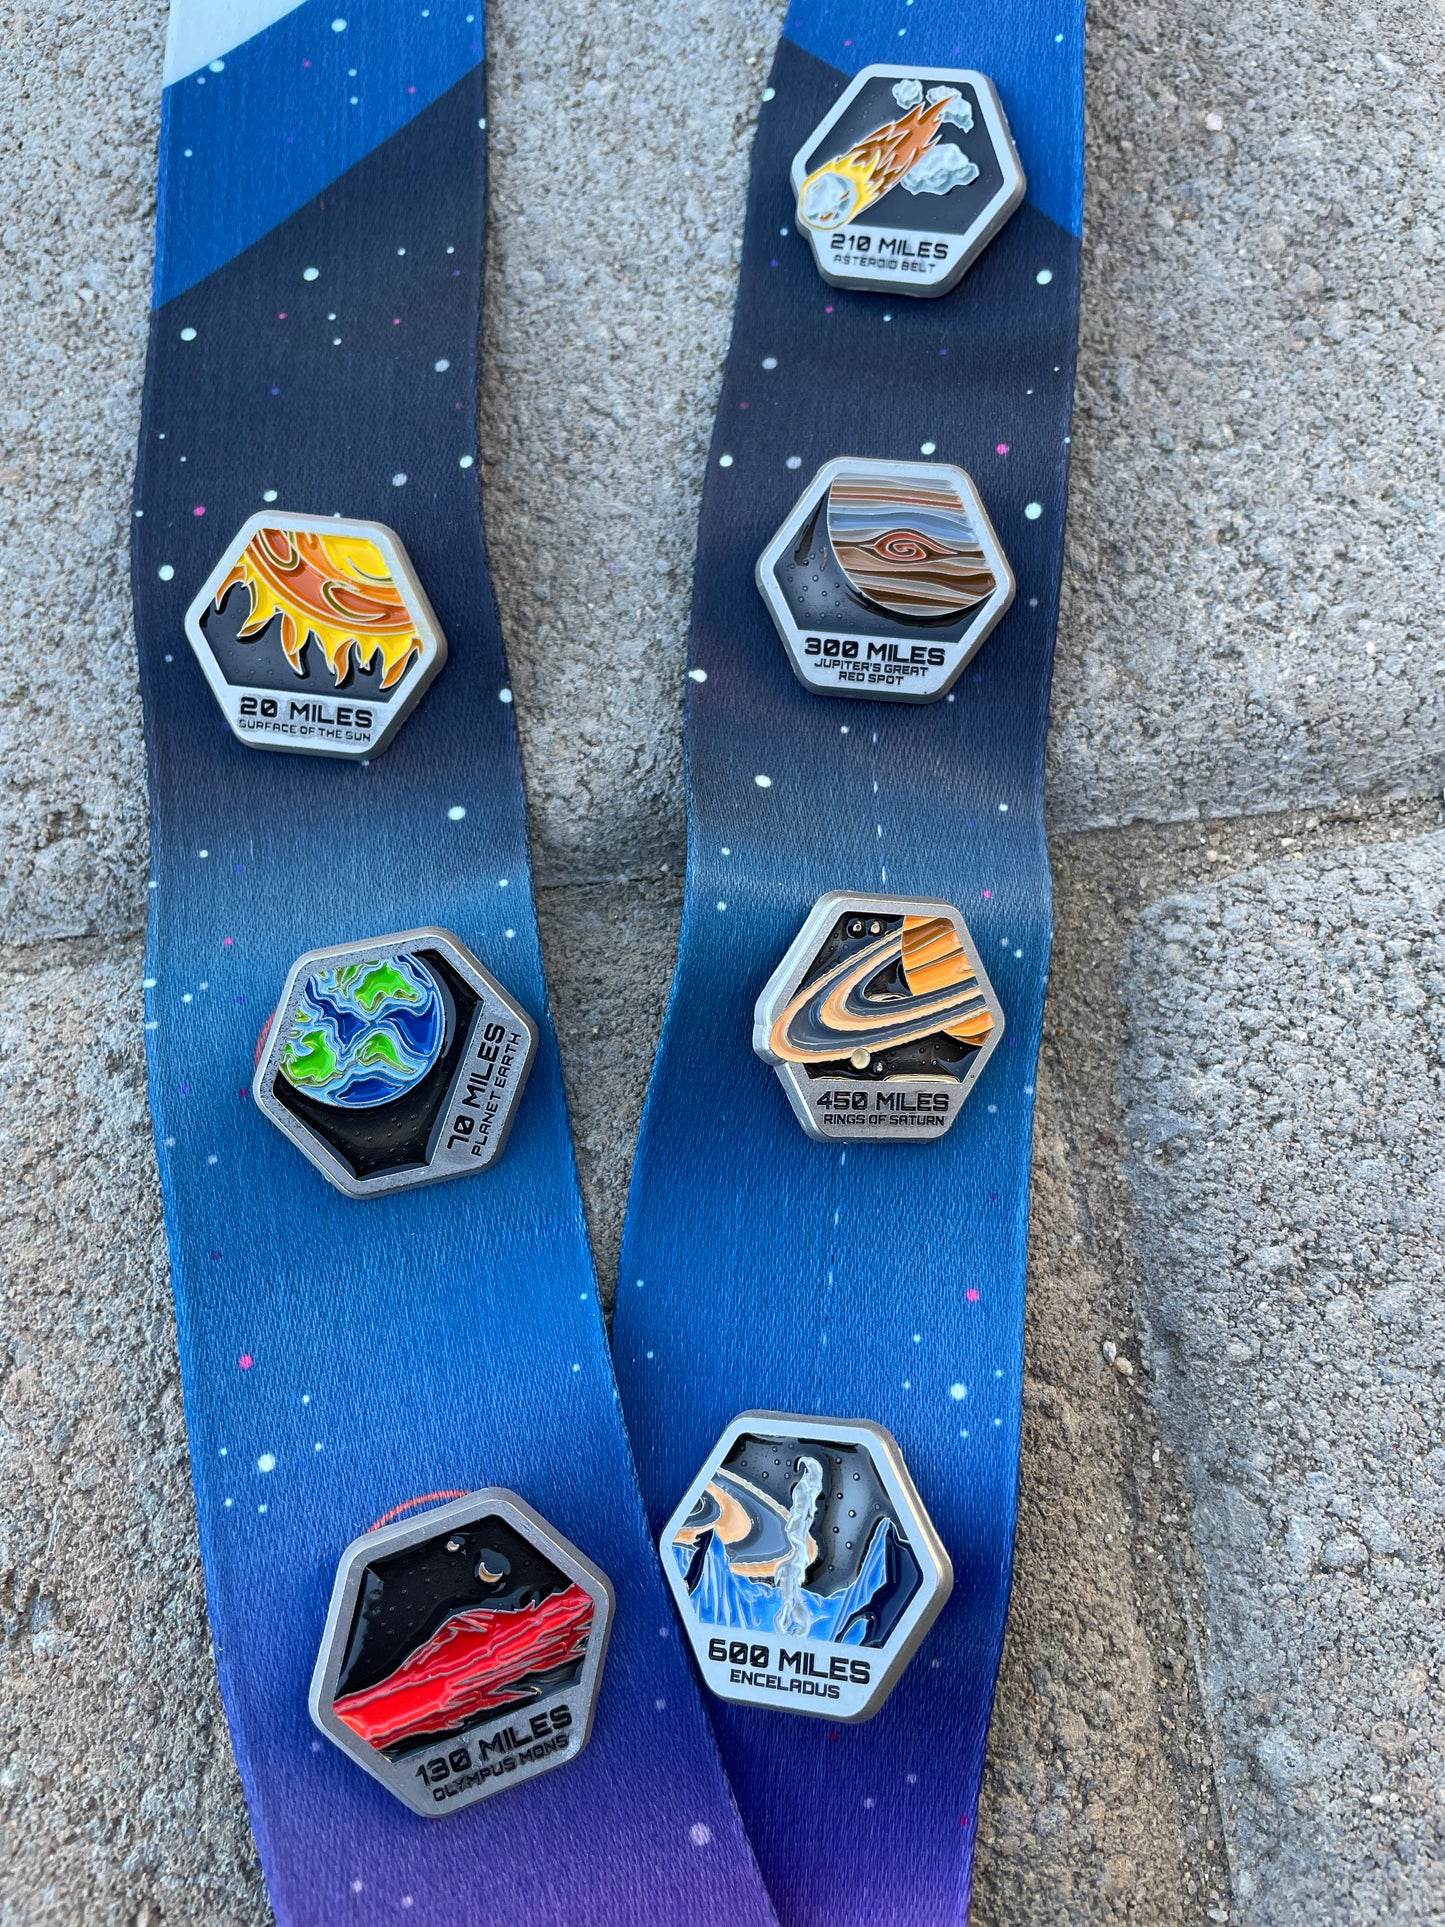 Last Chance: 7 Wonders of the Solar System Medal & Pins Bundle